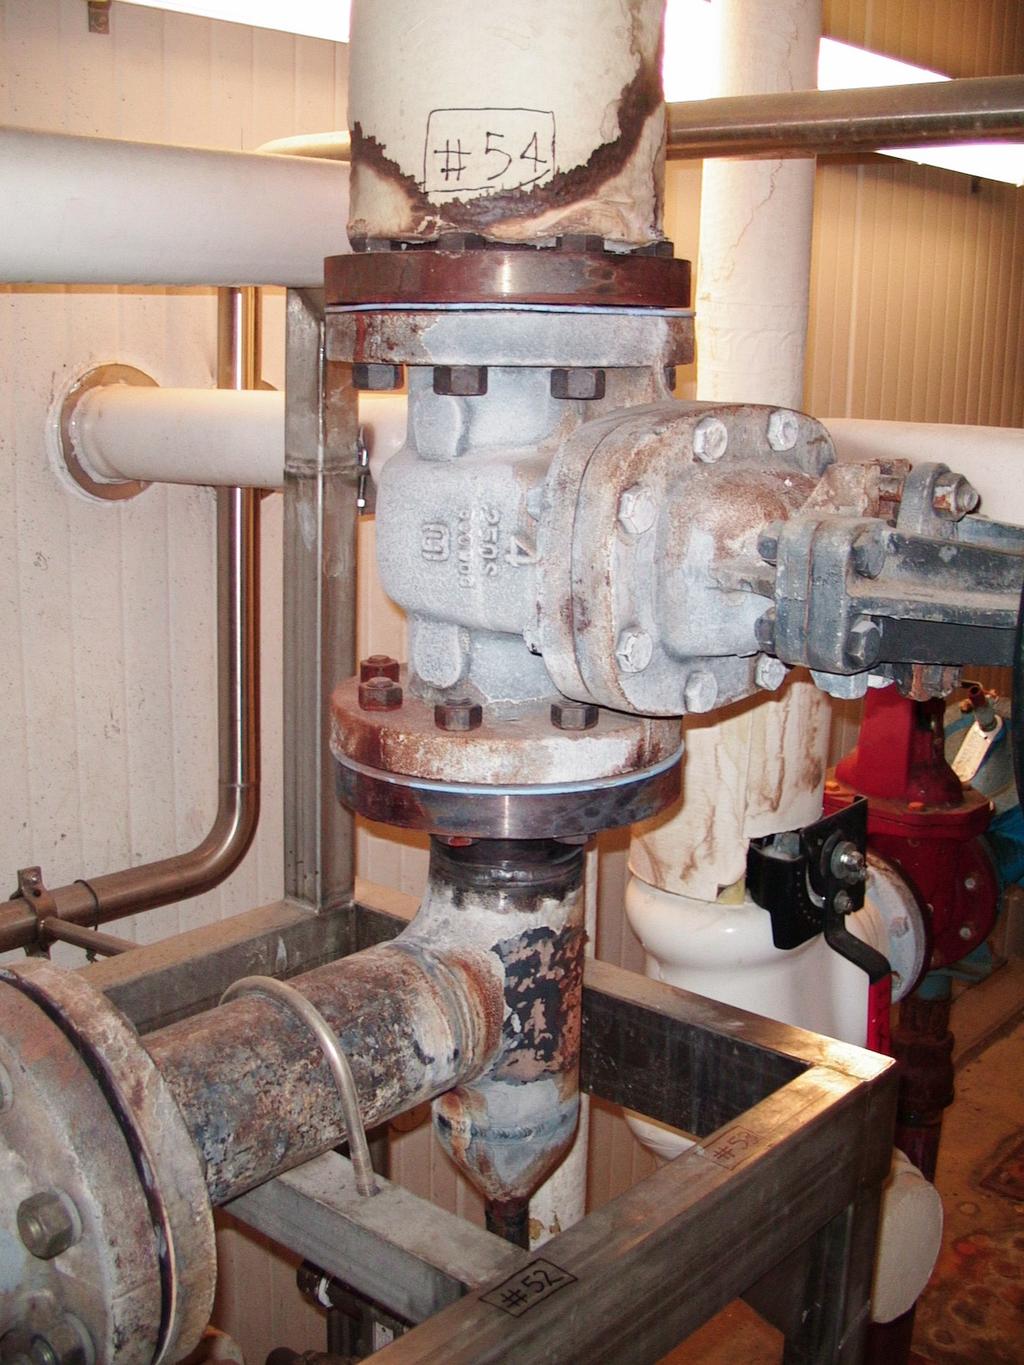 Example: Selling = 5 LF Pipe Energy Savings A history of neglect can